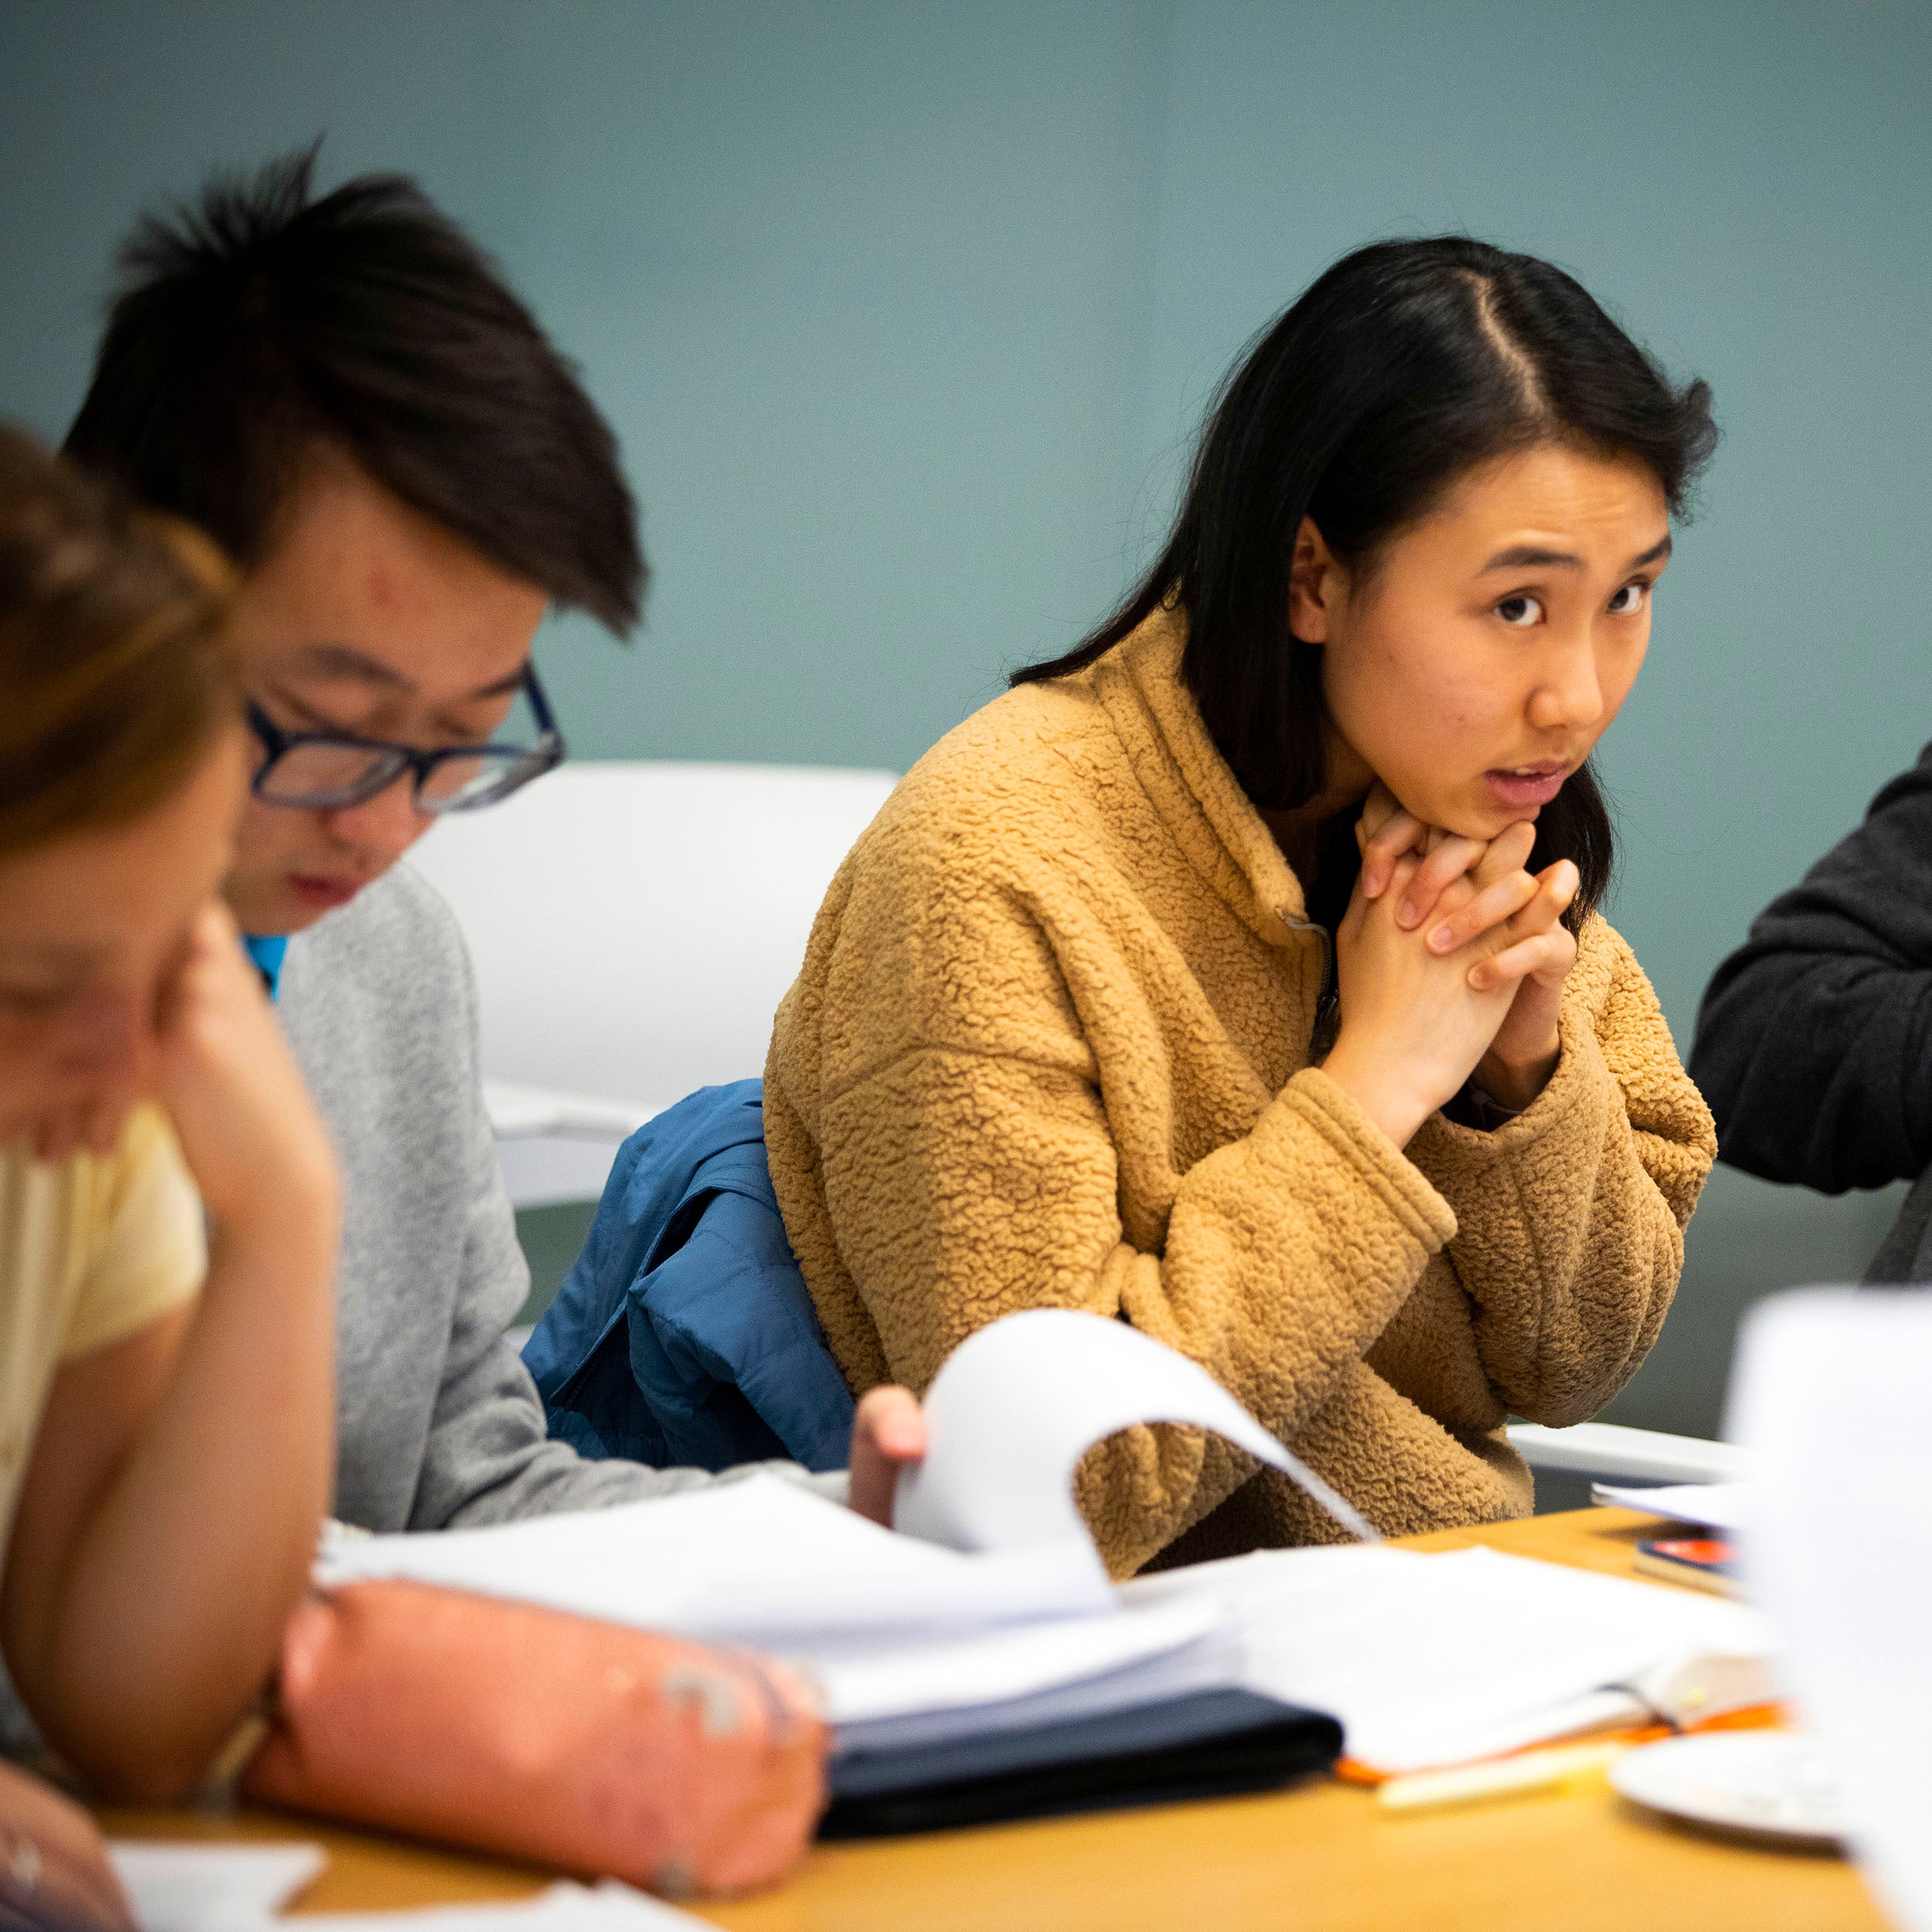 Katherine Li is pictured during class.